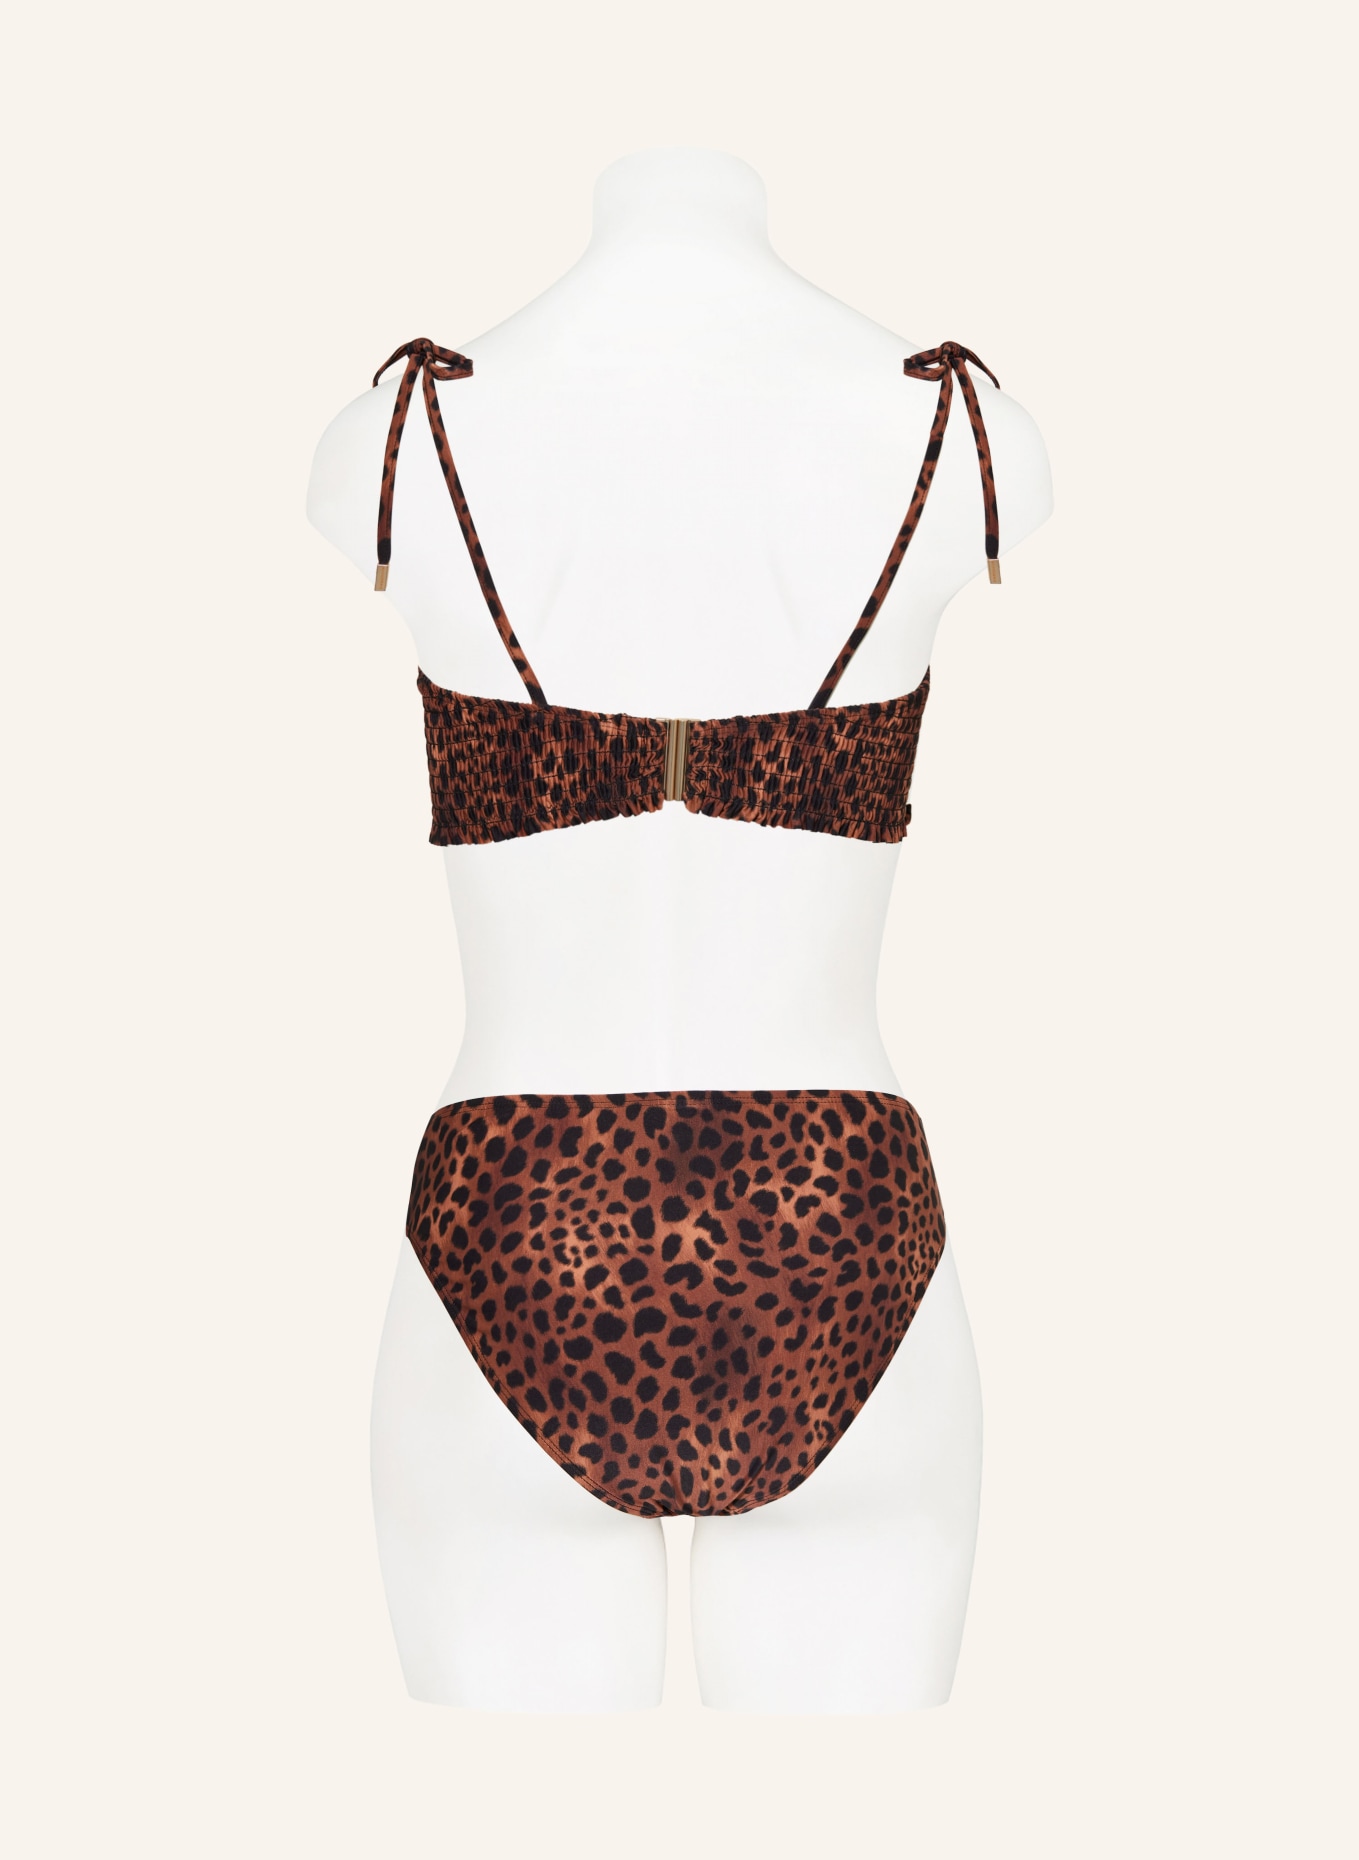 BEACHLIFE Underwired bikini top LEOPARD LOVER, Color: BLACK/ BROWN/ LIGHT BROWN (Image 3)